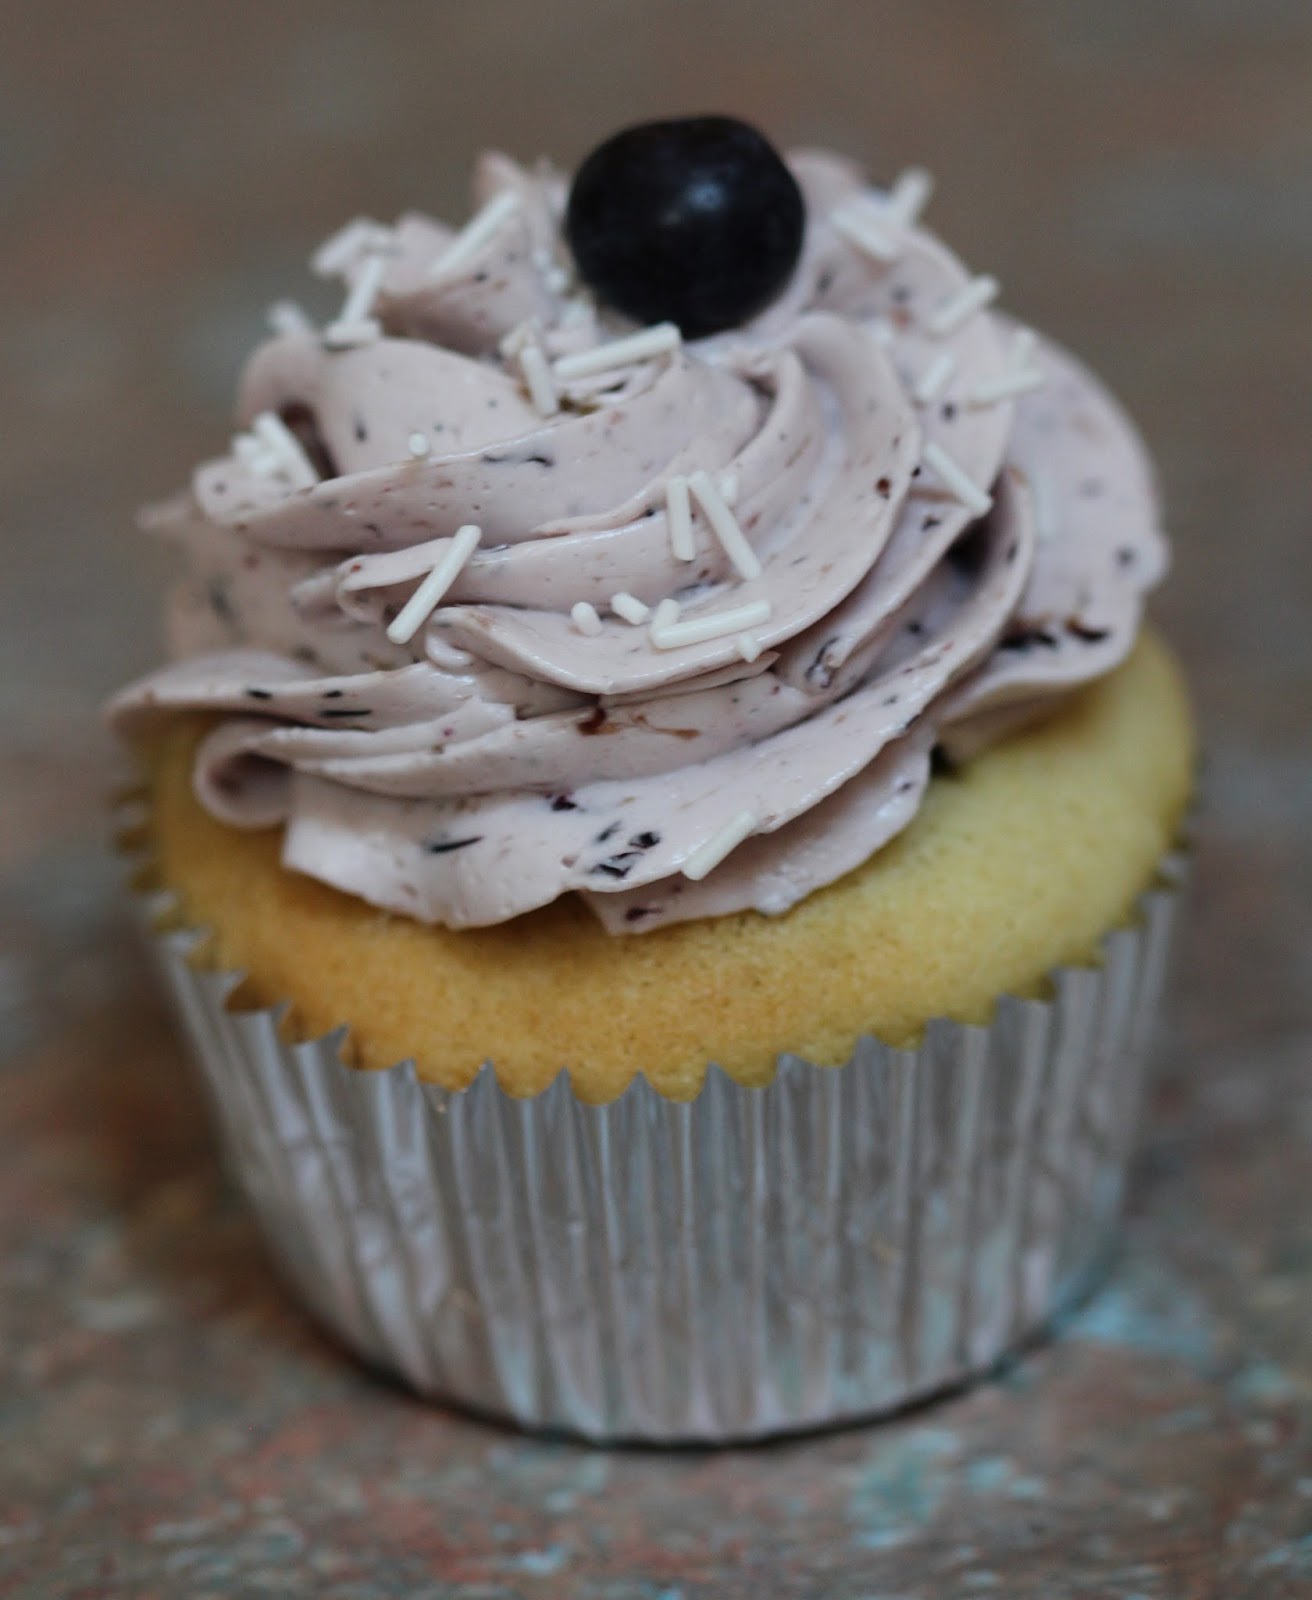 Lemon Blueberry Cupcakes with Buttercream Frosting